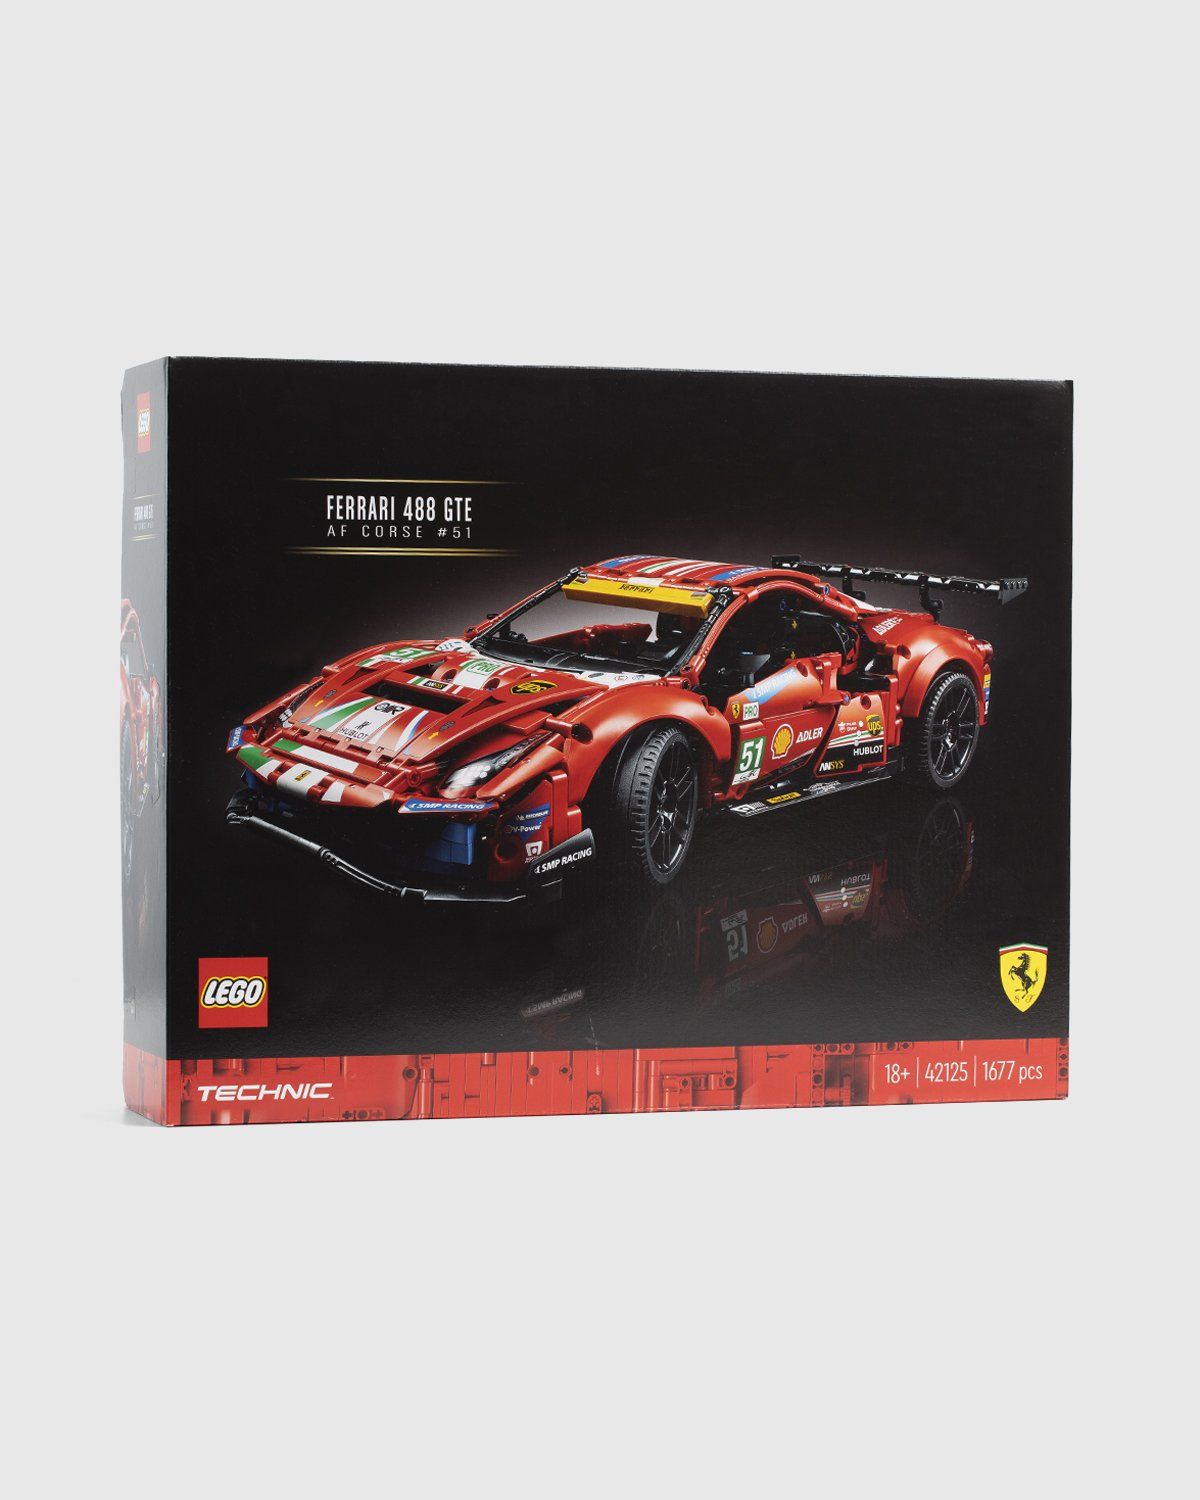 Lego – Technic Ferrari 488 GTE AF Corse 51 Red - Arts & Collectibles - Red - Image 3